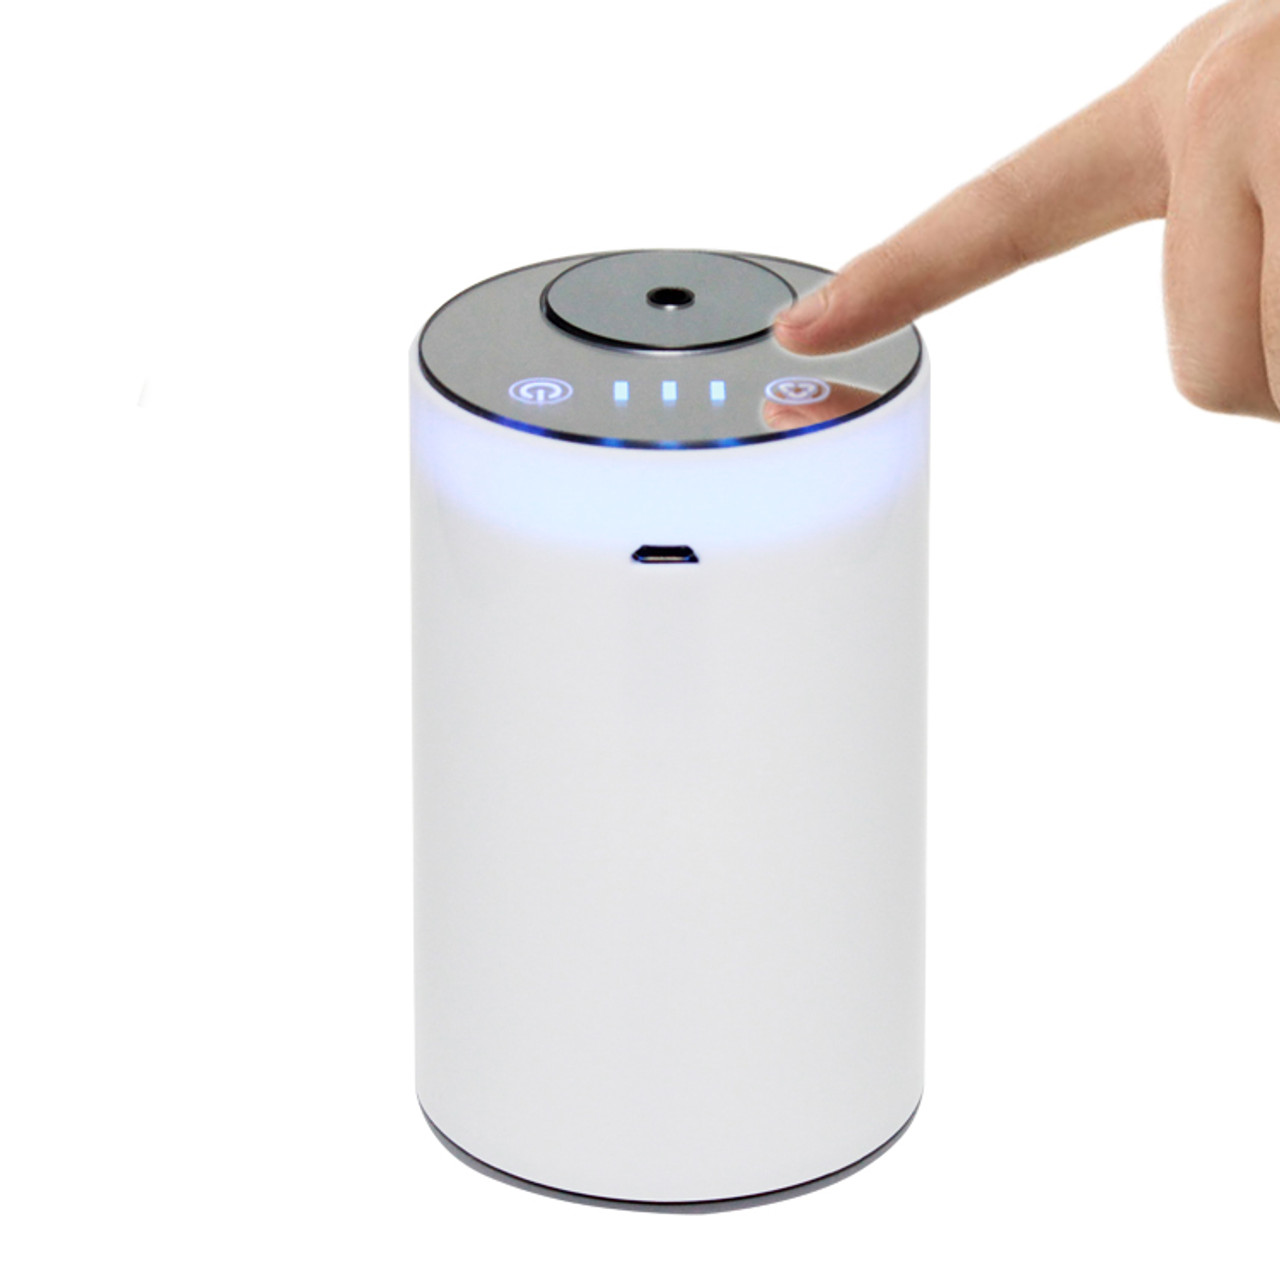 CarAroma Mini Battery Operated Aromatherapy Oil Diffuser with USB